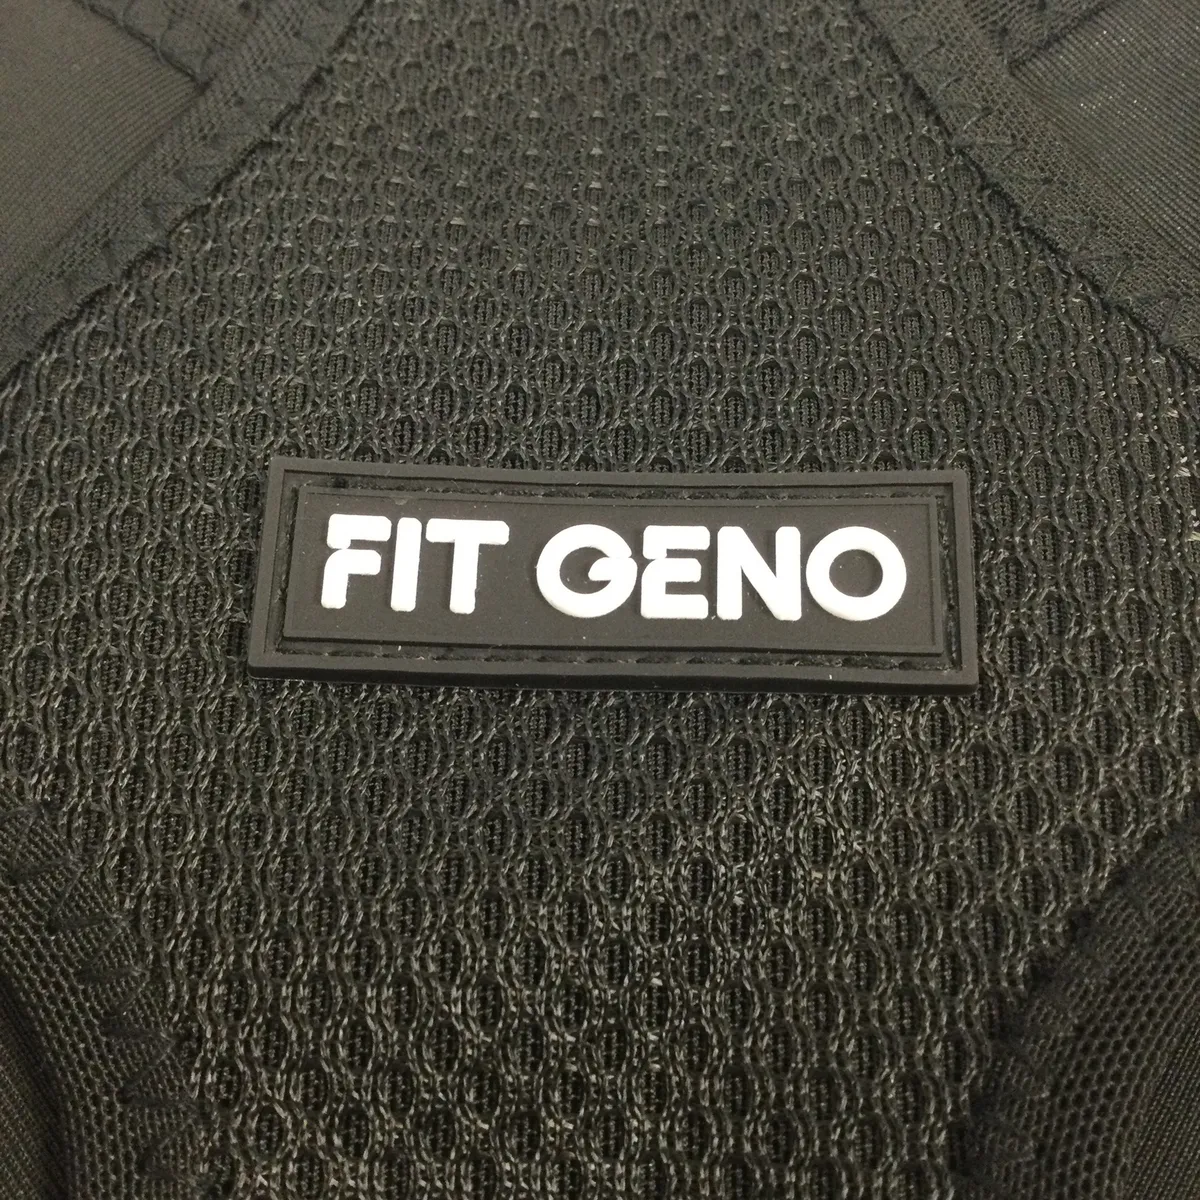 Fit Geno Unisex Black 2 In 1 Back Brace And Posture Corrector Size Small